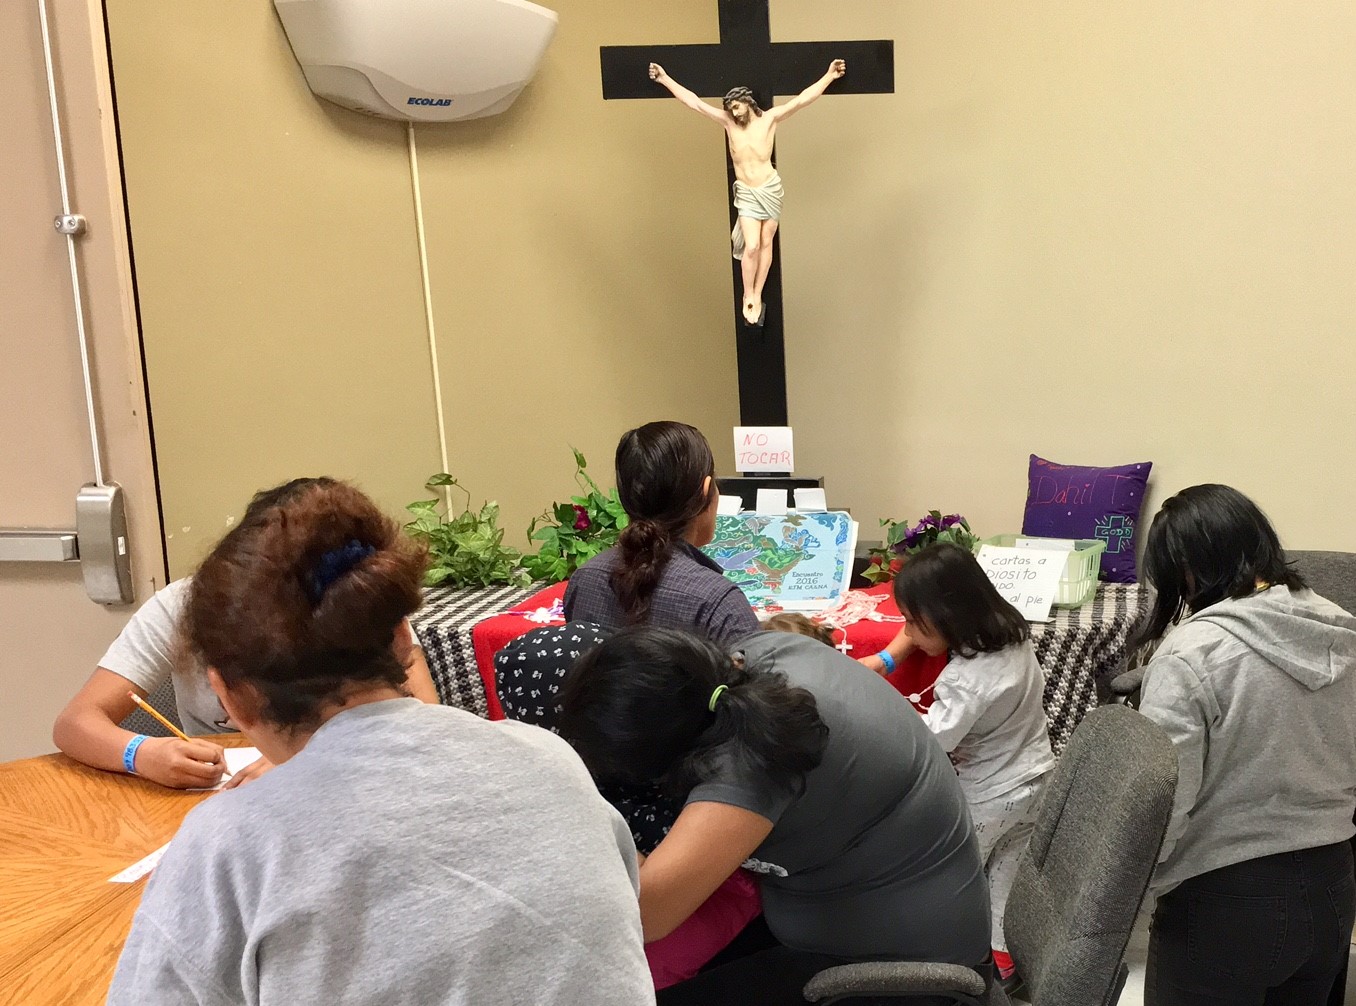 A group of immigrants pray at the Casa del Refugiado immigrant shelter in El Paso, Texas. (Courtesy of Pauline Hovey)